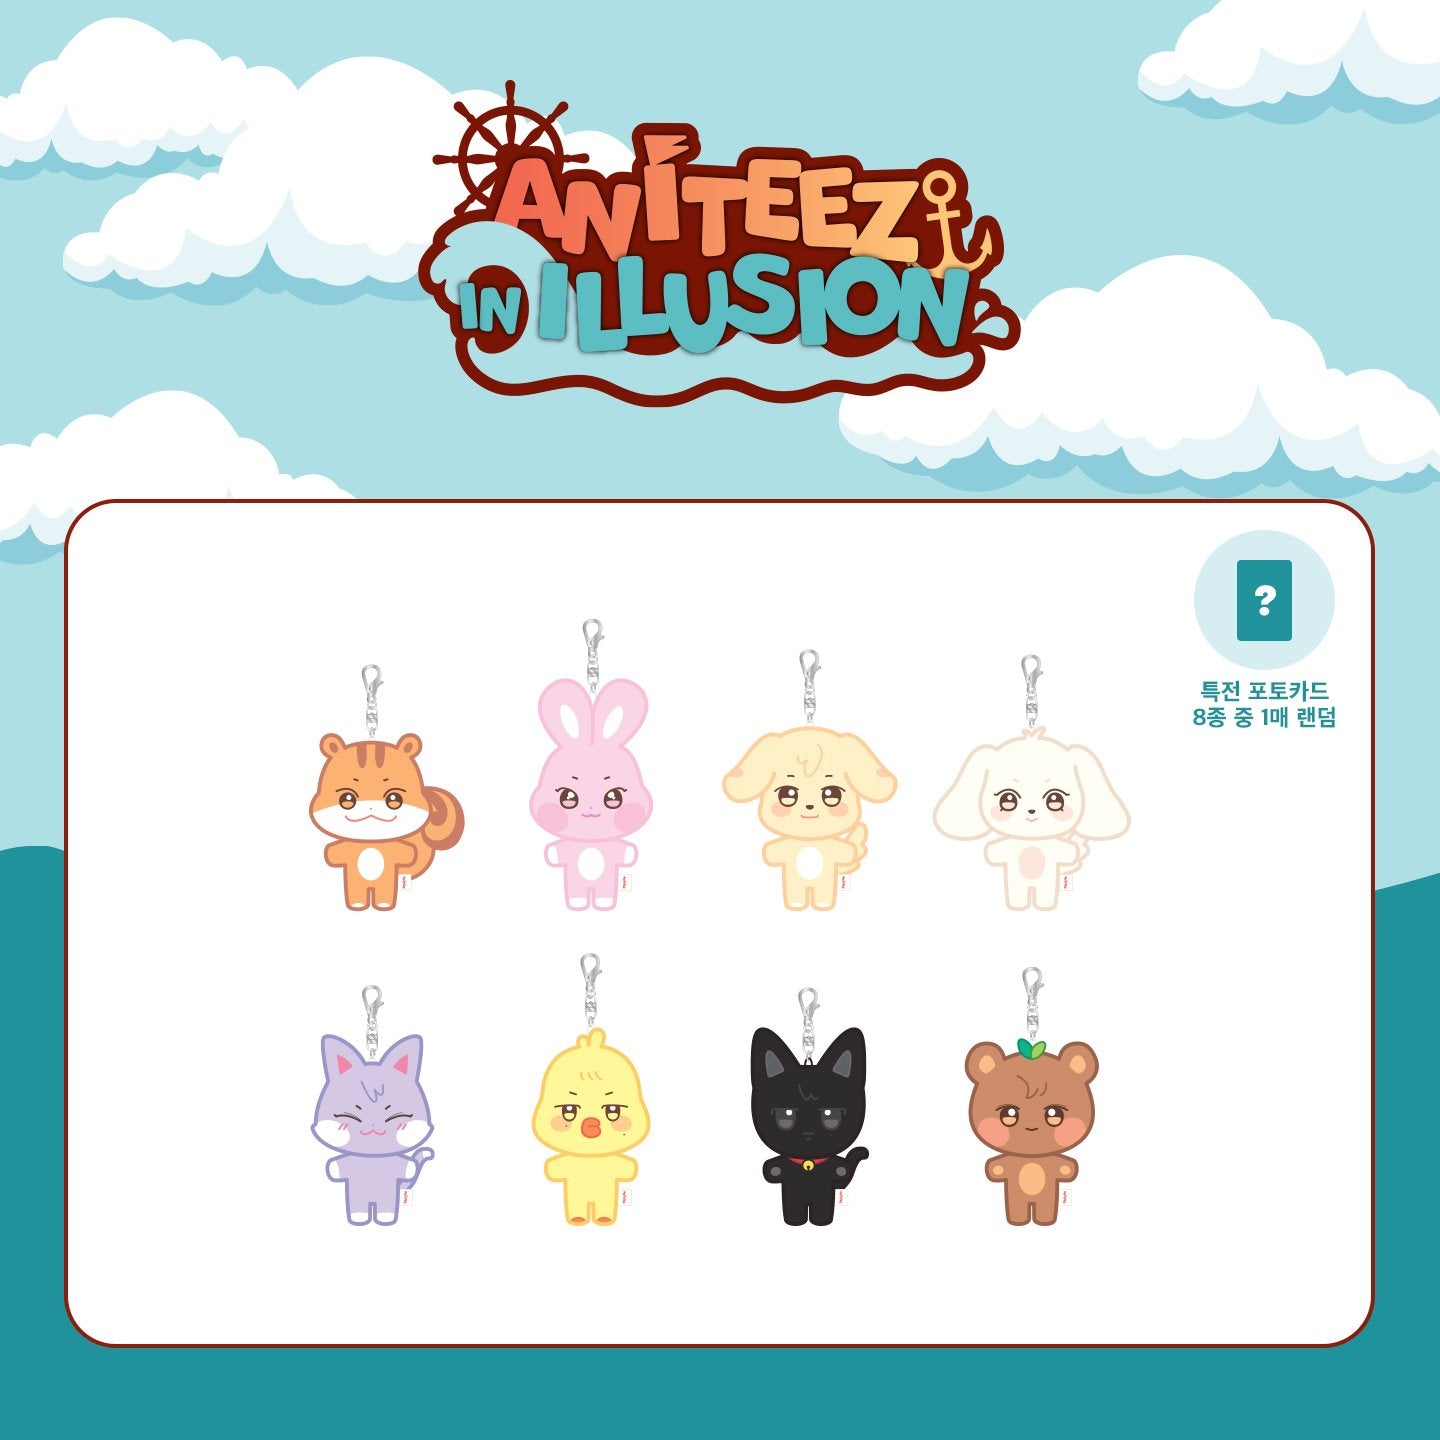 ATEEZ - ANITEEZ IN ILLUSION OFFICIAL MD [PLUSH KEYRING]